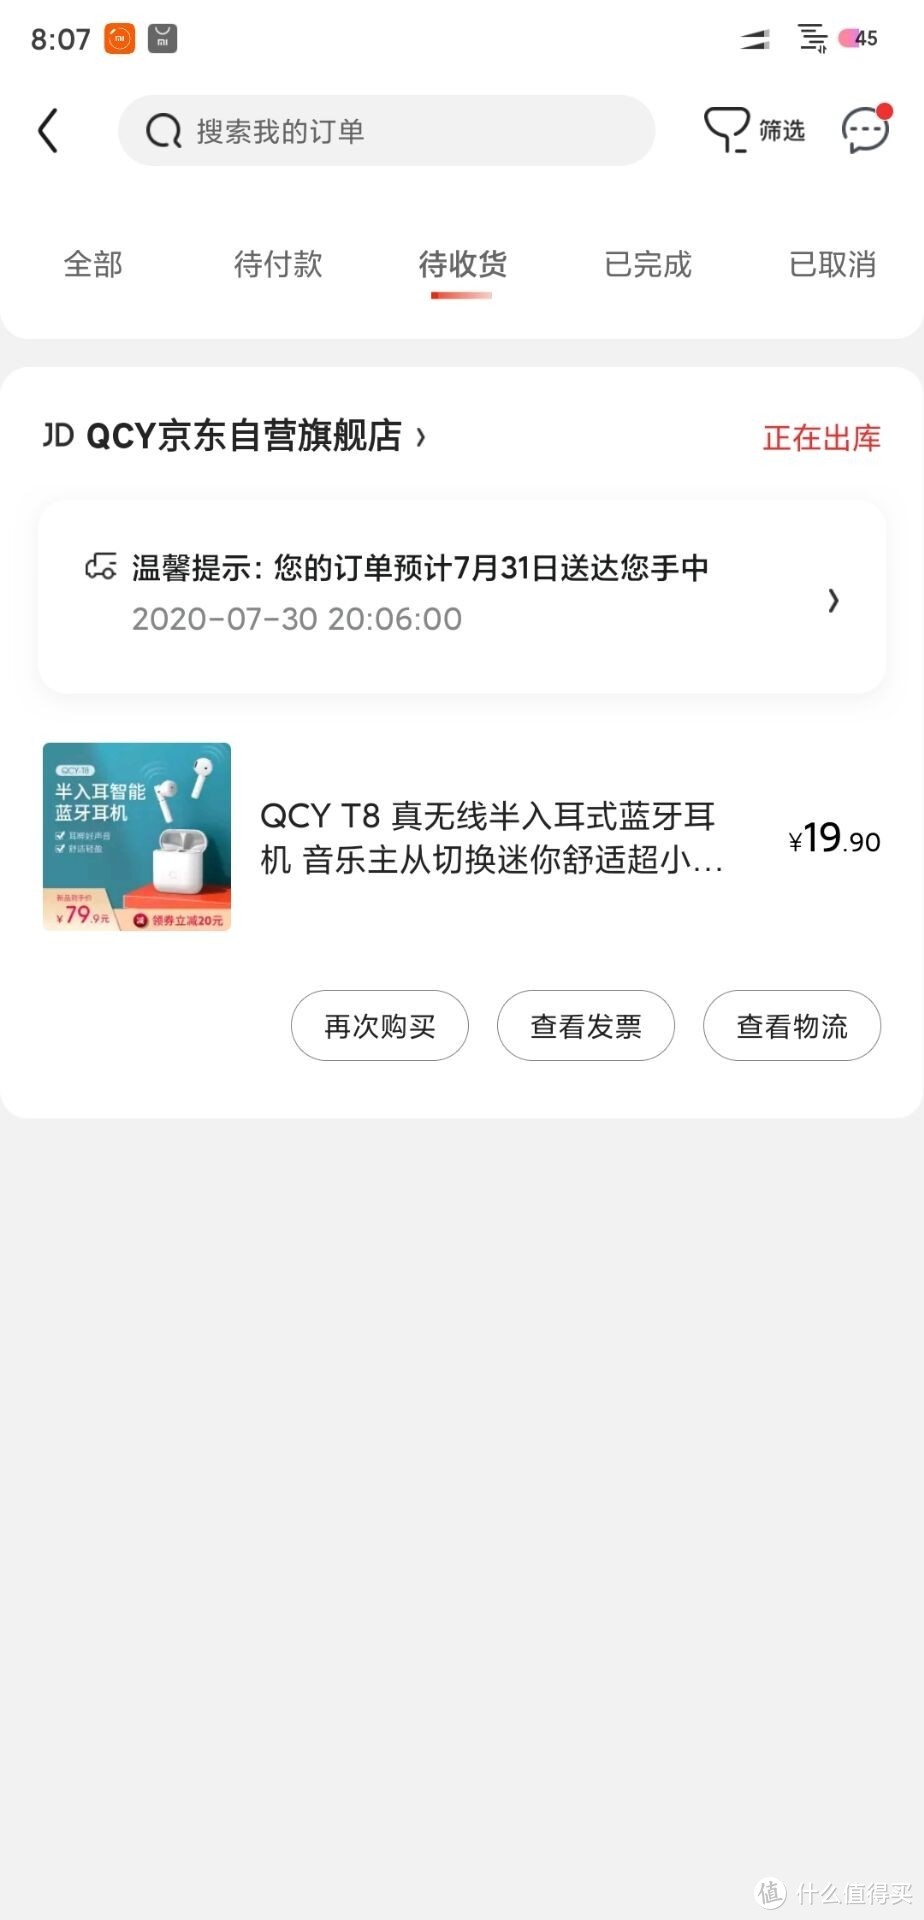 QCY-t8——个人体验